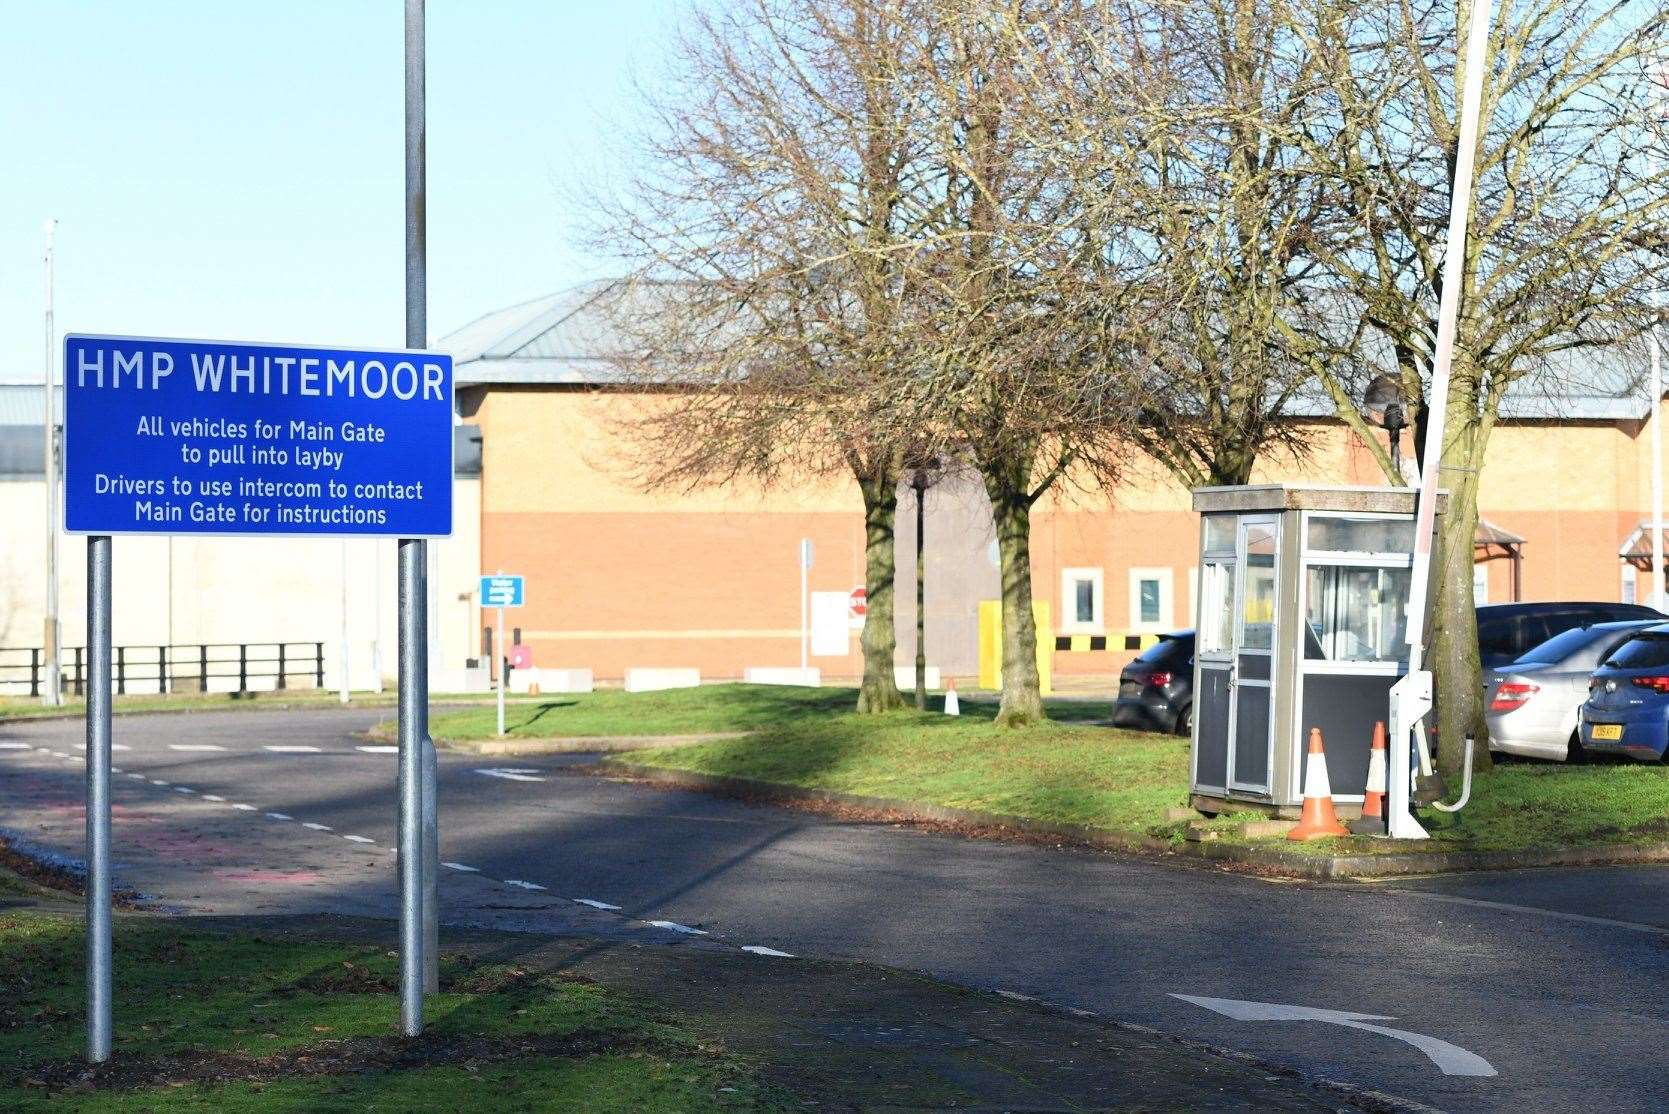 The attack happened at Whitemoor Prison